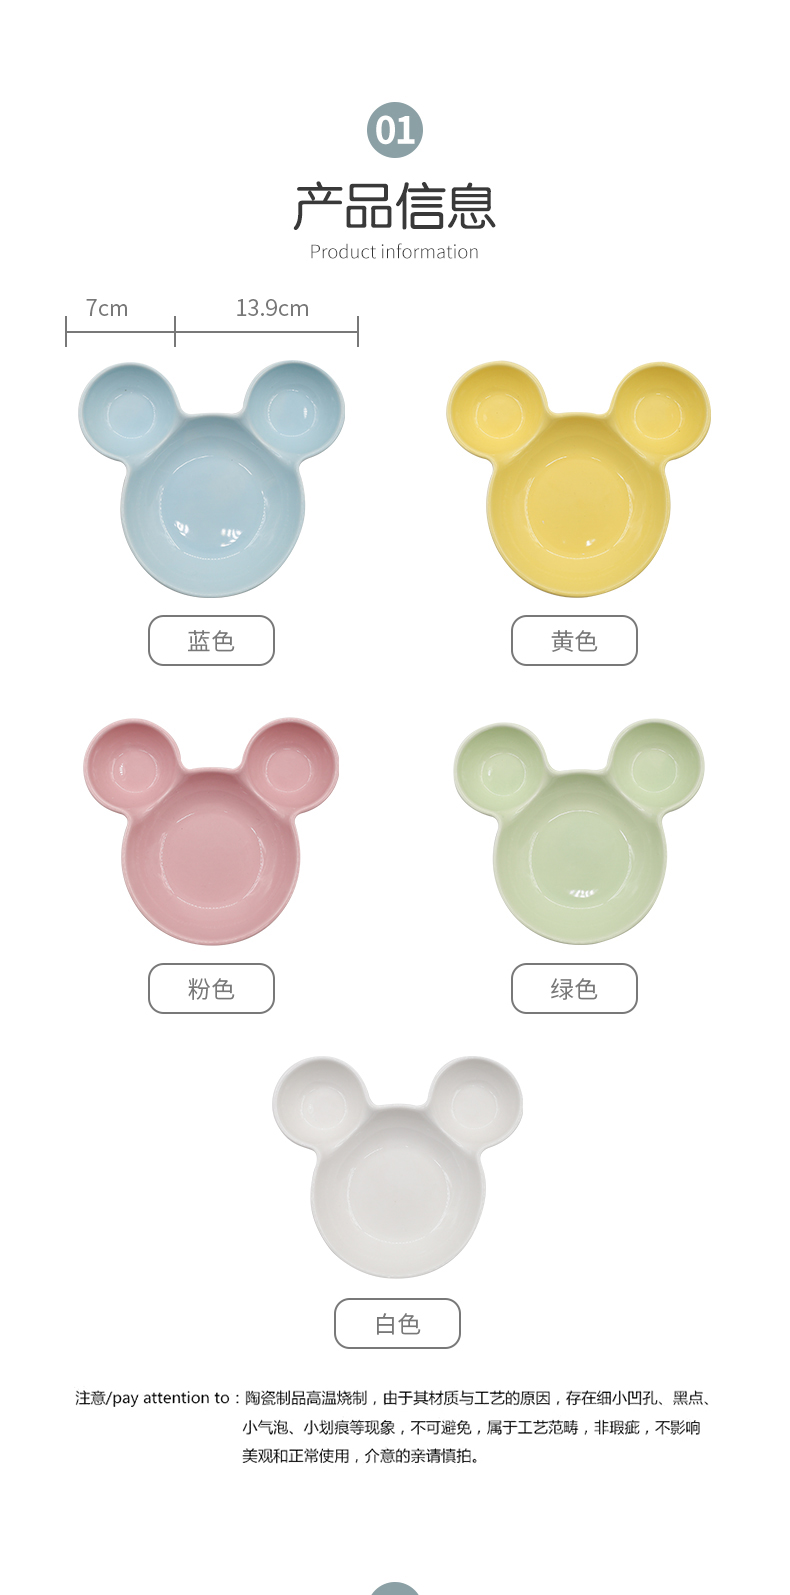 Jingdezhen ceramic cartoon express mickey baking pan mickey Mouse fruit snacks baked cheese baked bread and butter